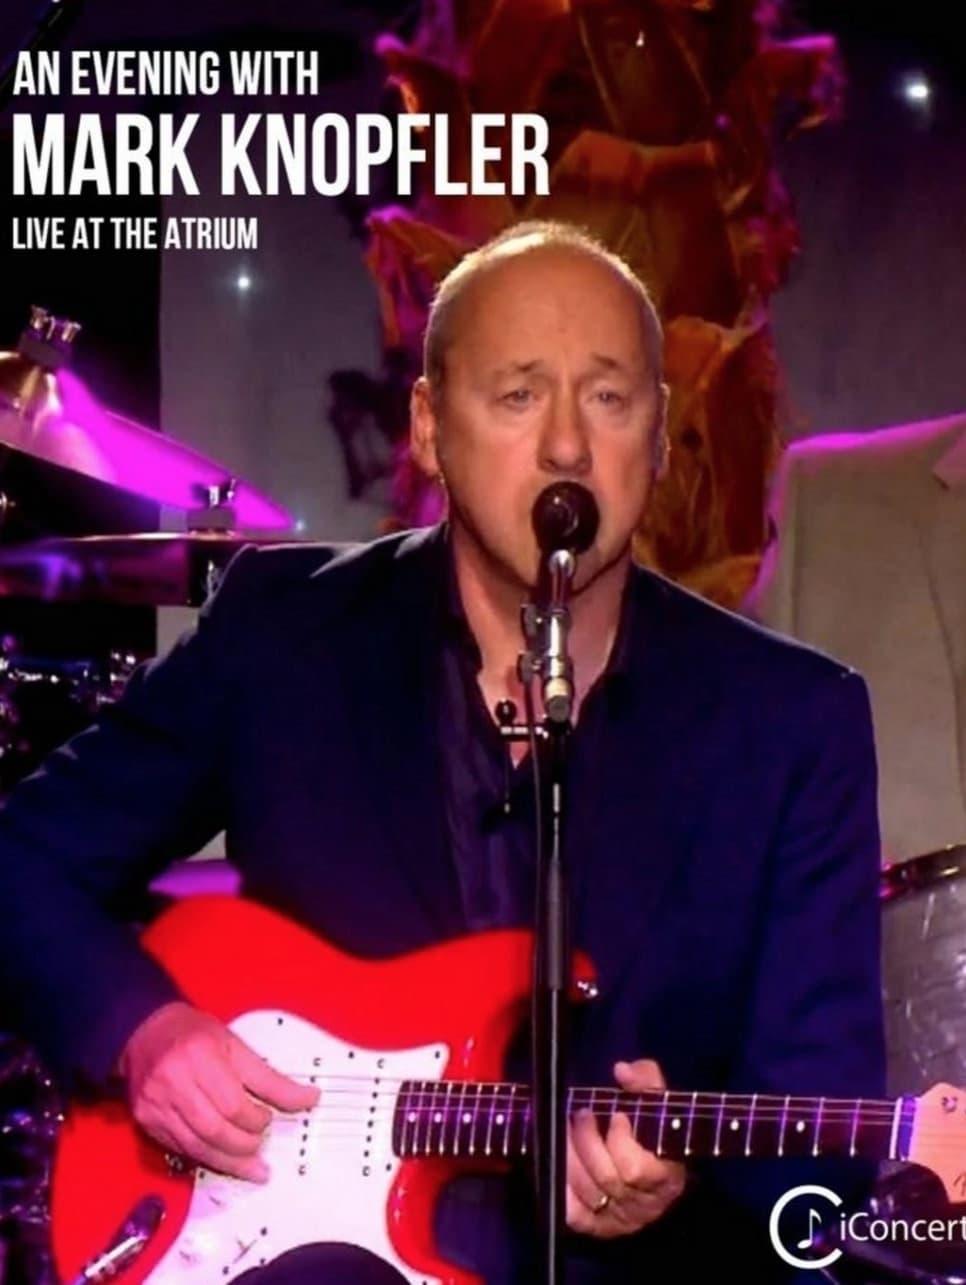 An Evening with Mark Knopfler and band poster